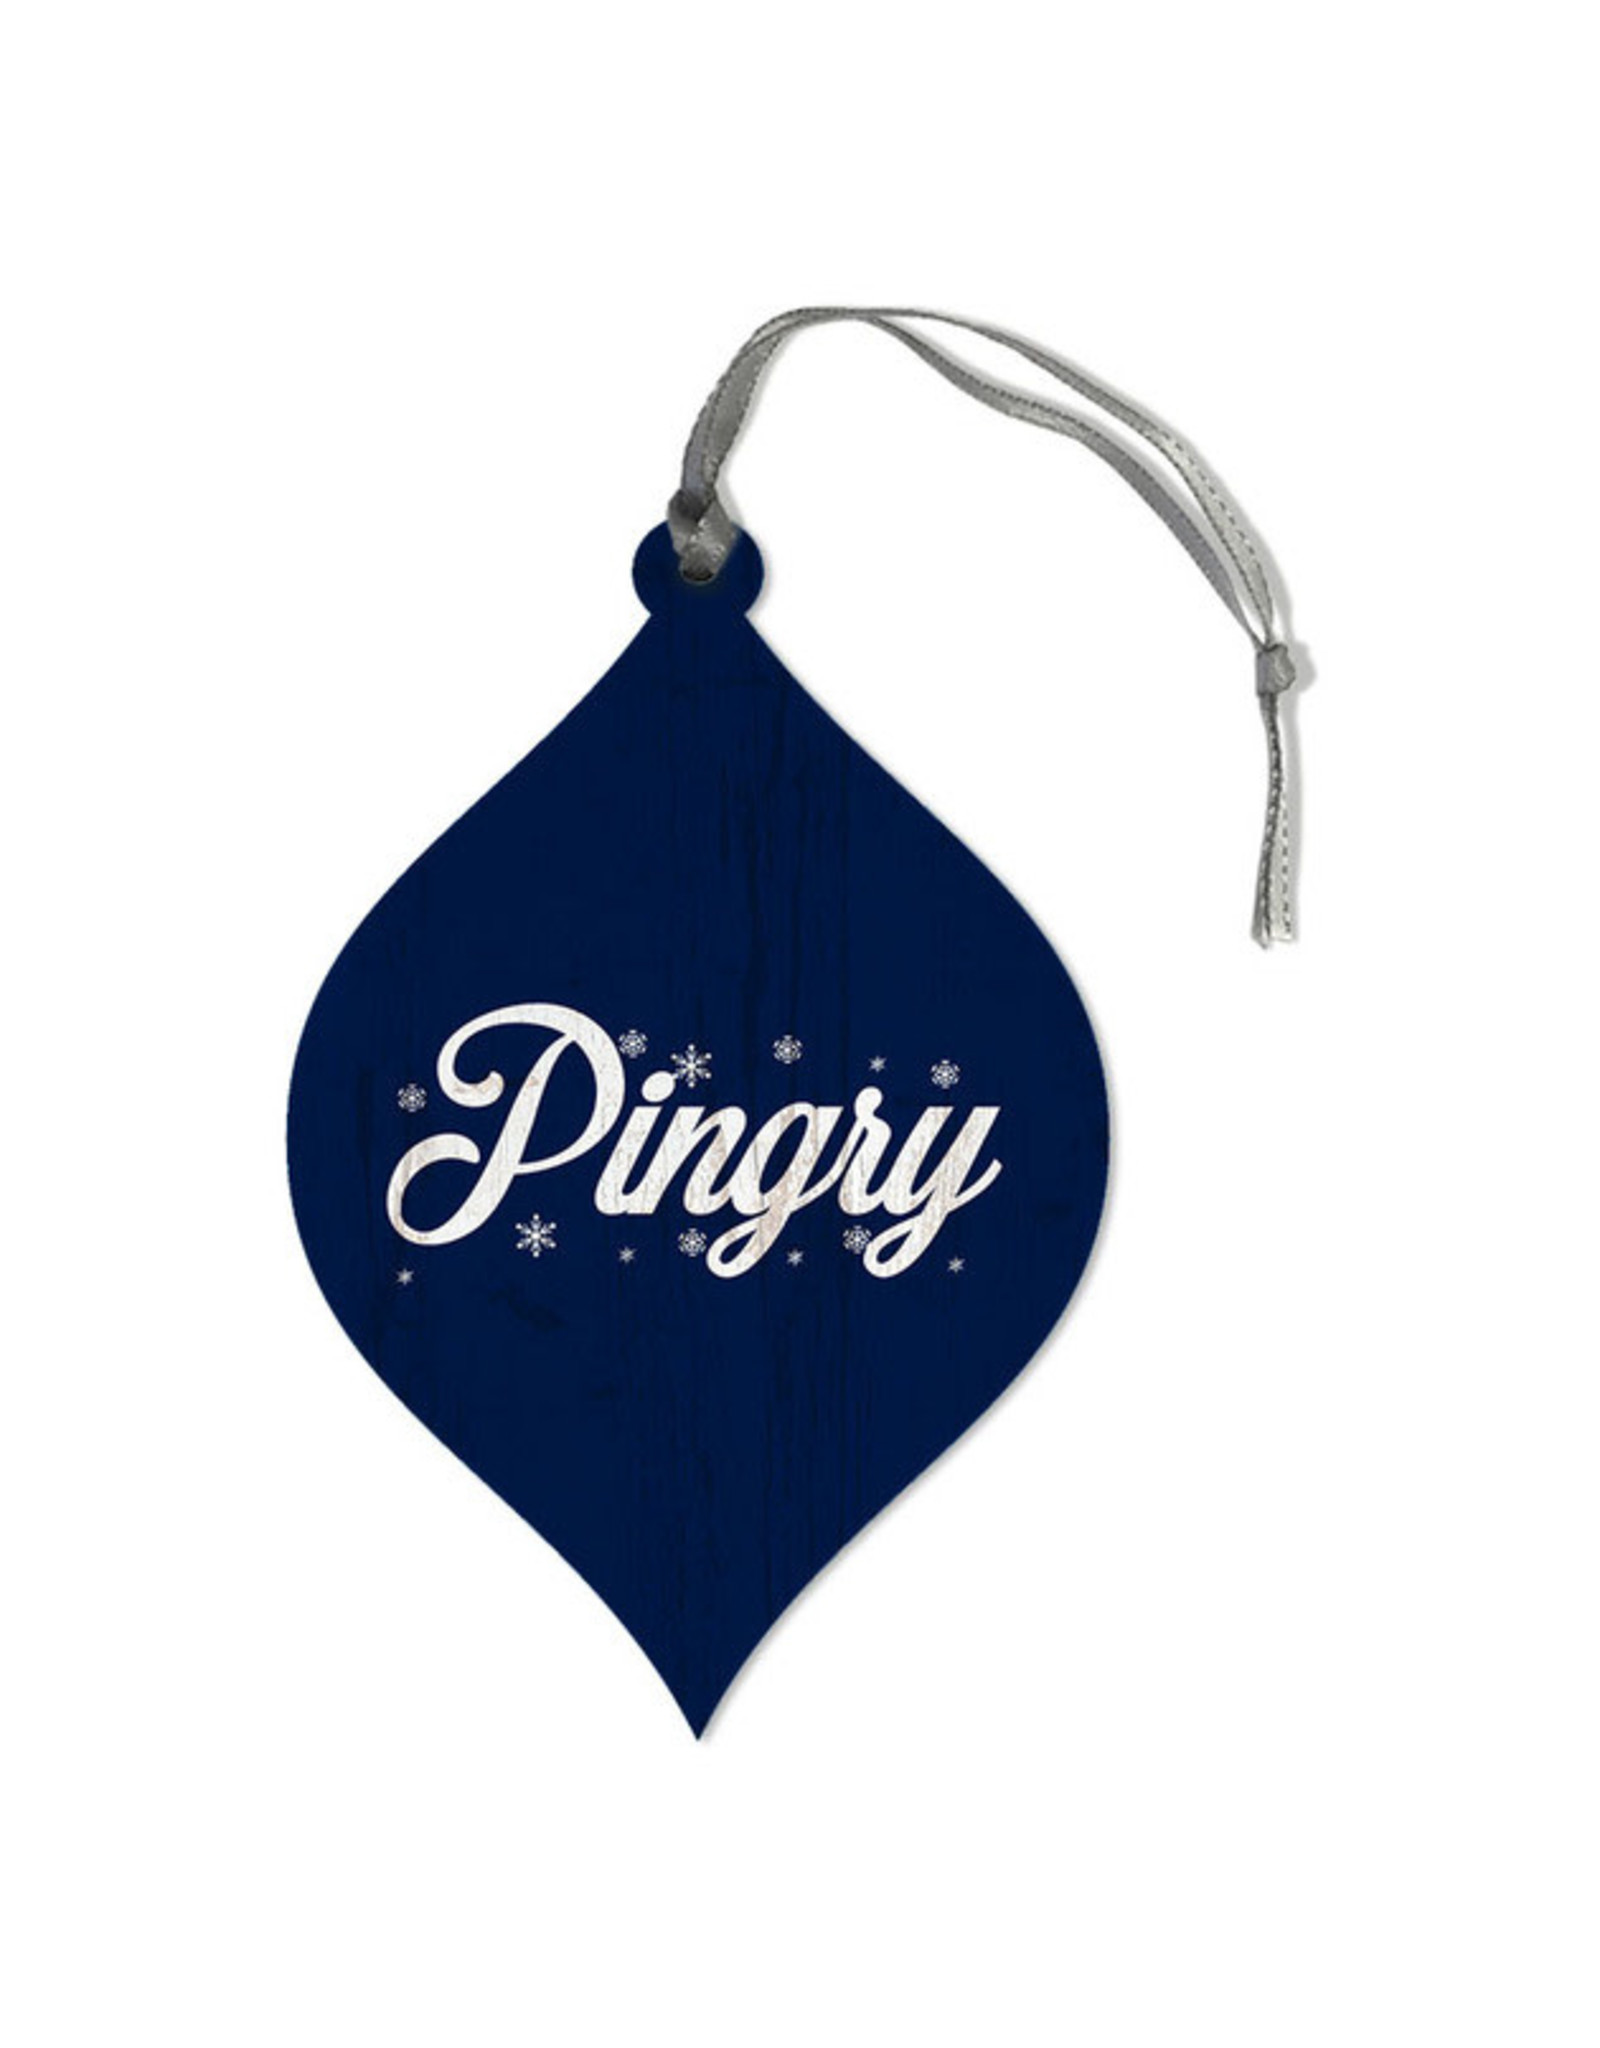 Pingry ornament